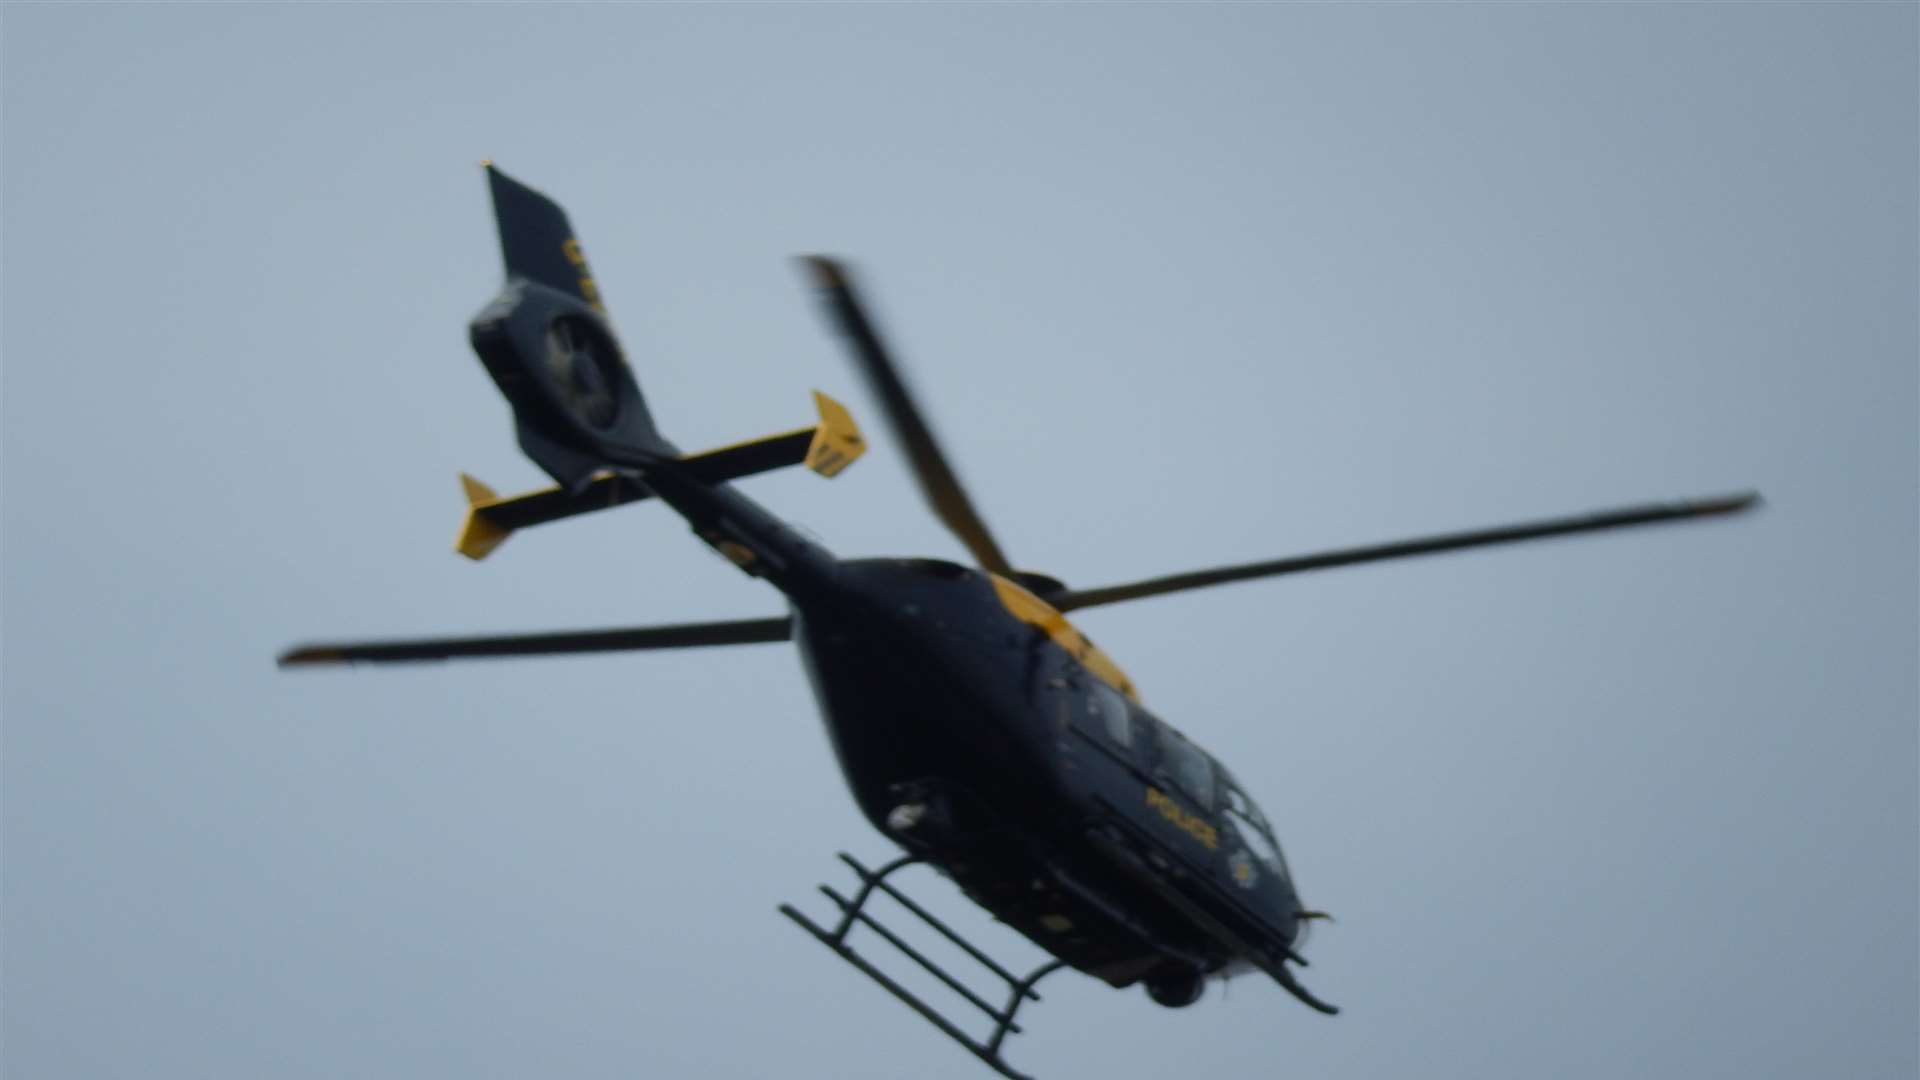 The police helicopter was used in the hunt. Picture by Joanne Strange